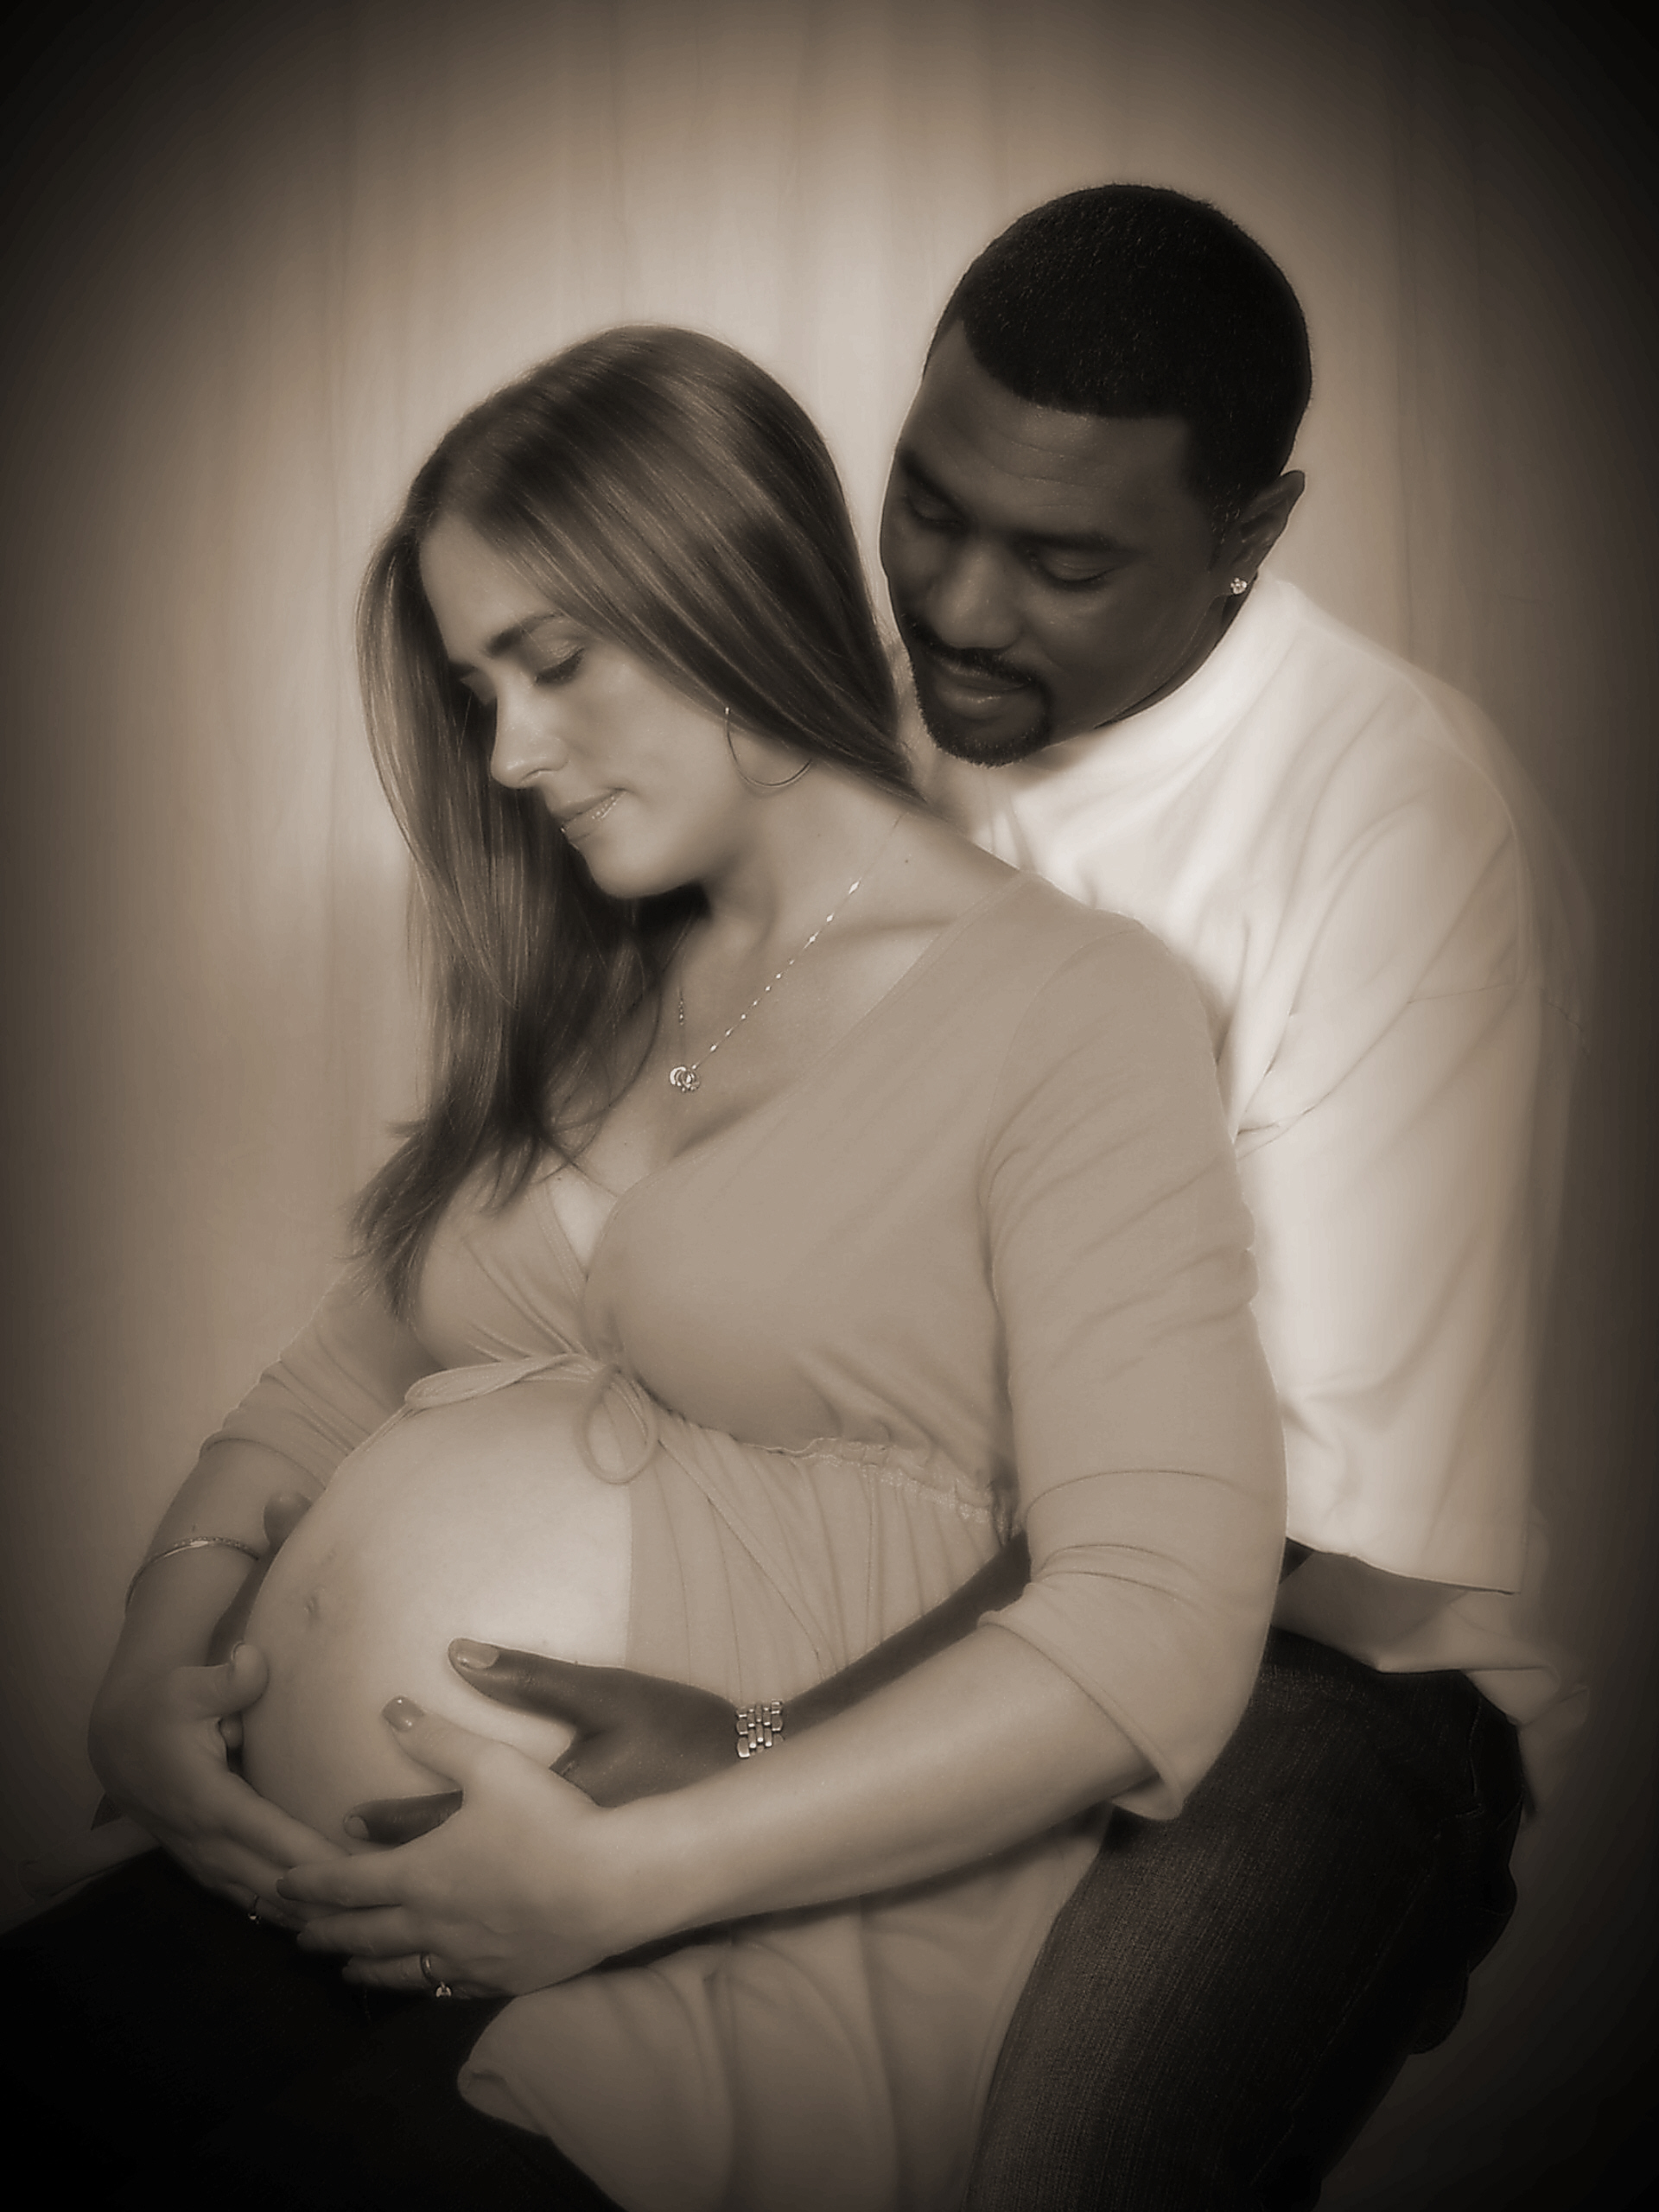 Pregnant By Black Man The BodyProud Initiative.